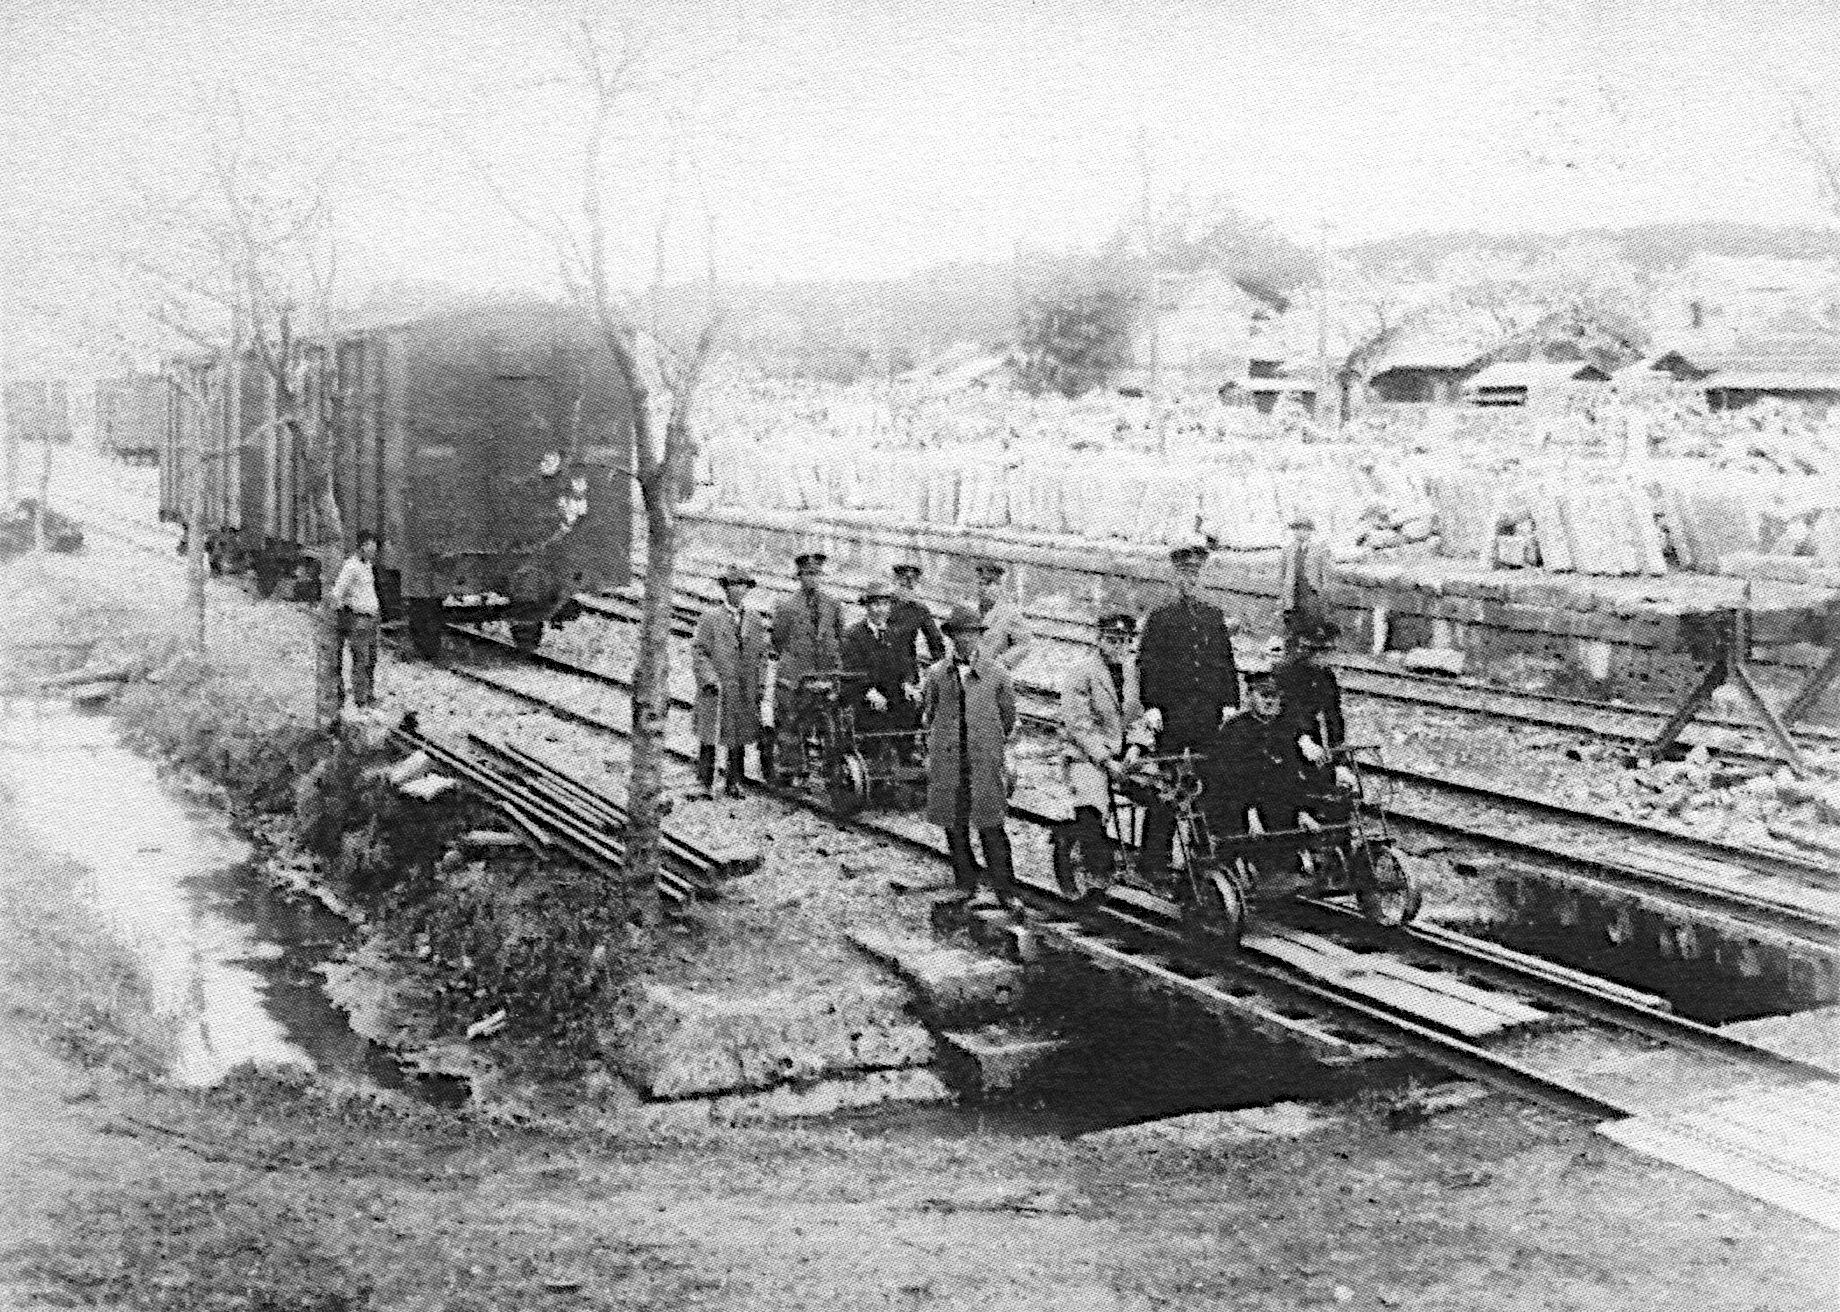 Arahari Station in the late 1920s, early 30s and a track-cycle for railroad maintenance